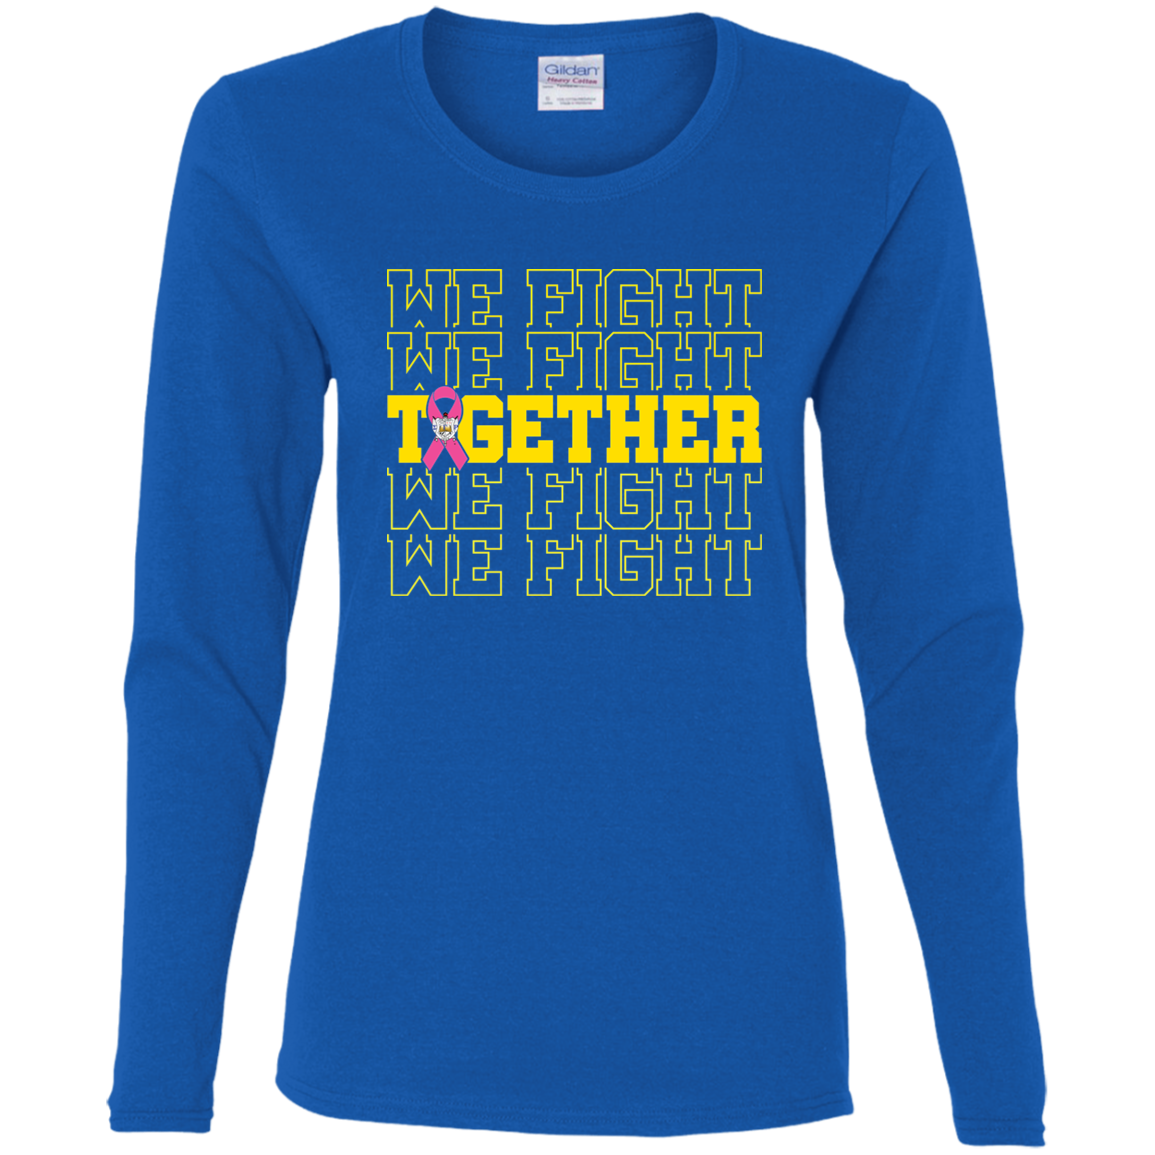 We Fight Together SGRho Ladies' Cotton LS T-Shirt